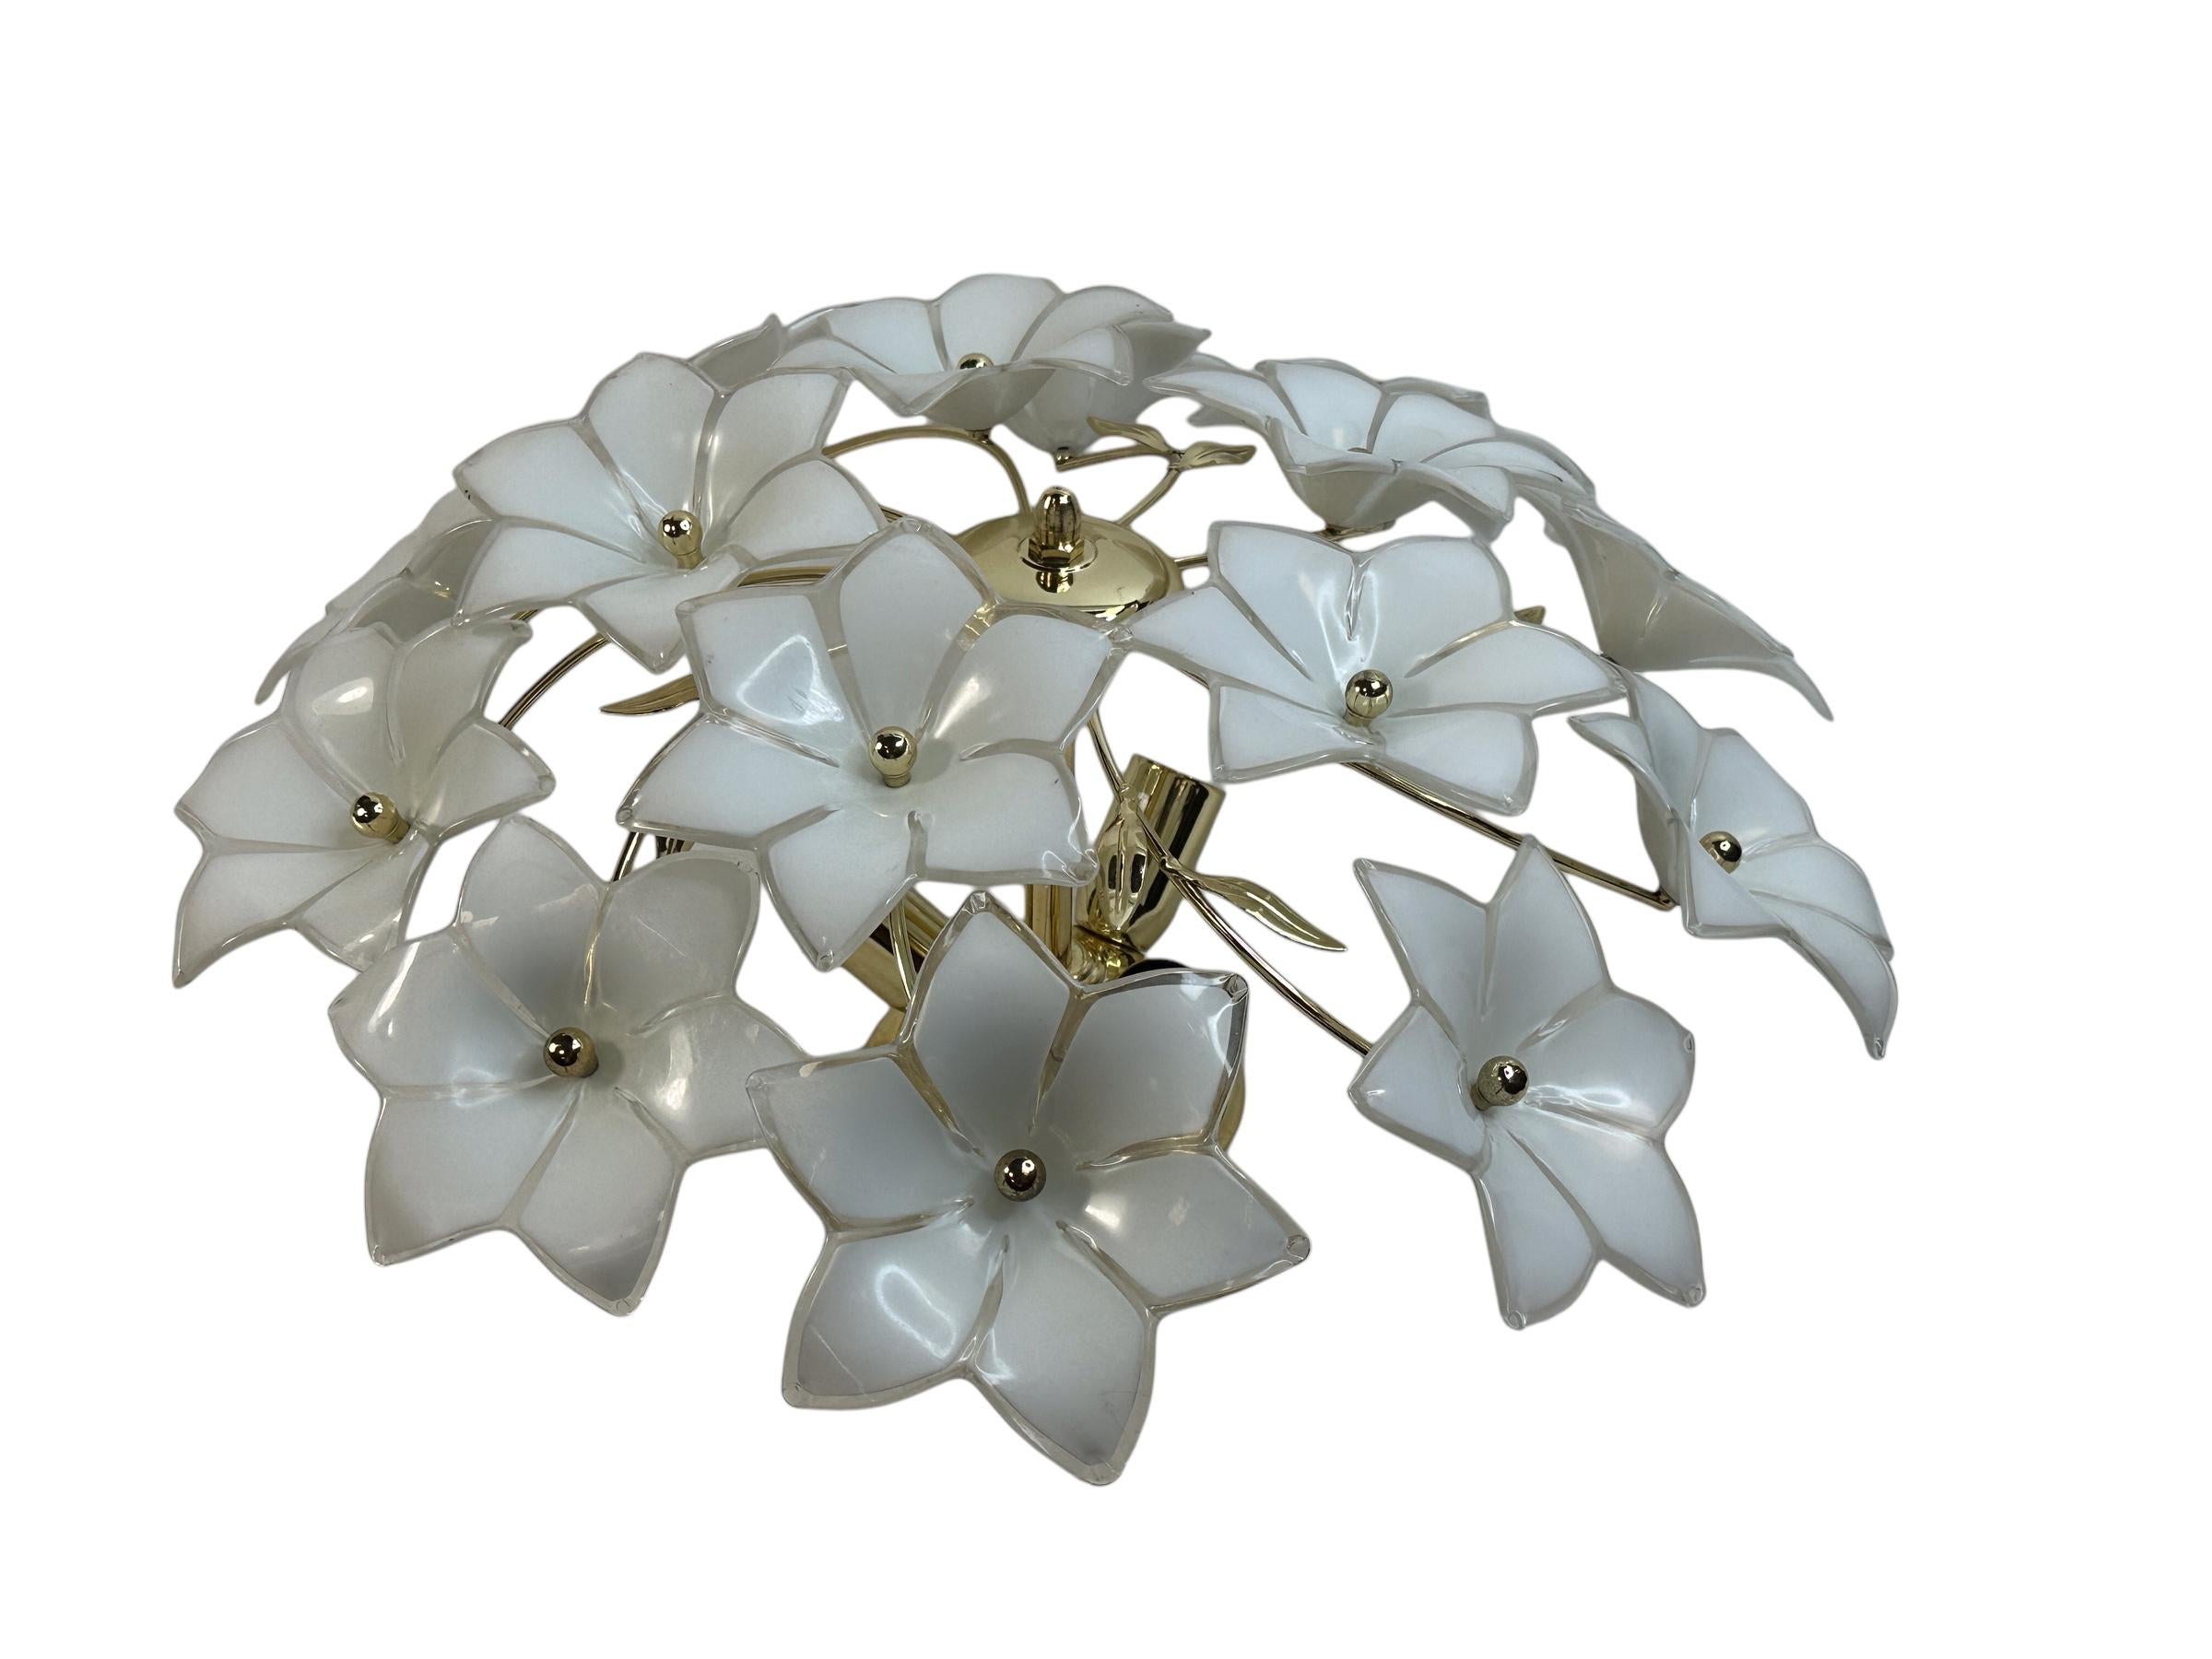 A beautiful flush mount ceiling light, made in Italy in the 1970s. Some beautiful glass flowers, hand made and therefor different in shape. The Fixture requires three European E14 / 110 Volt Candelabra bulbs, each bulb up to 40 watts.. It can also